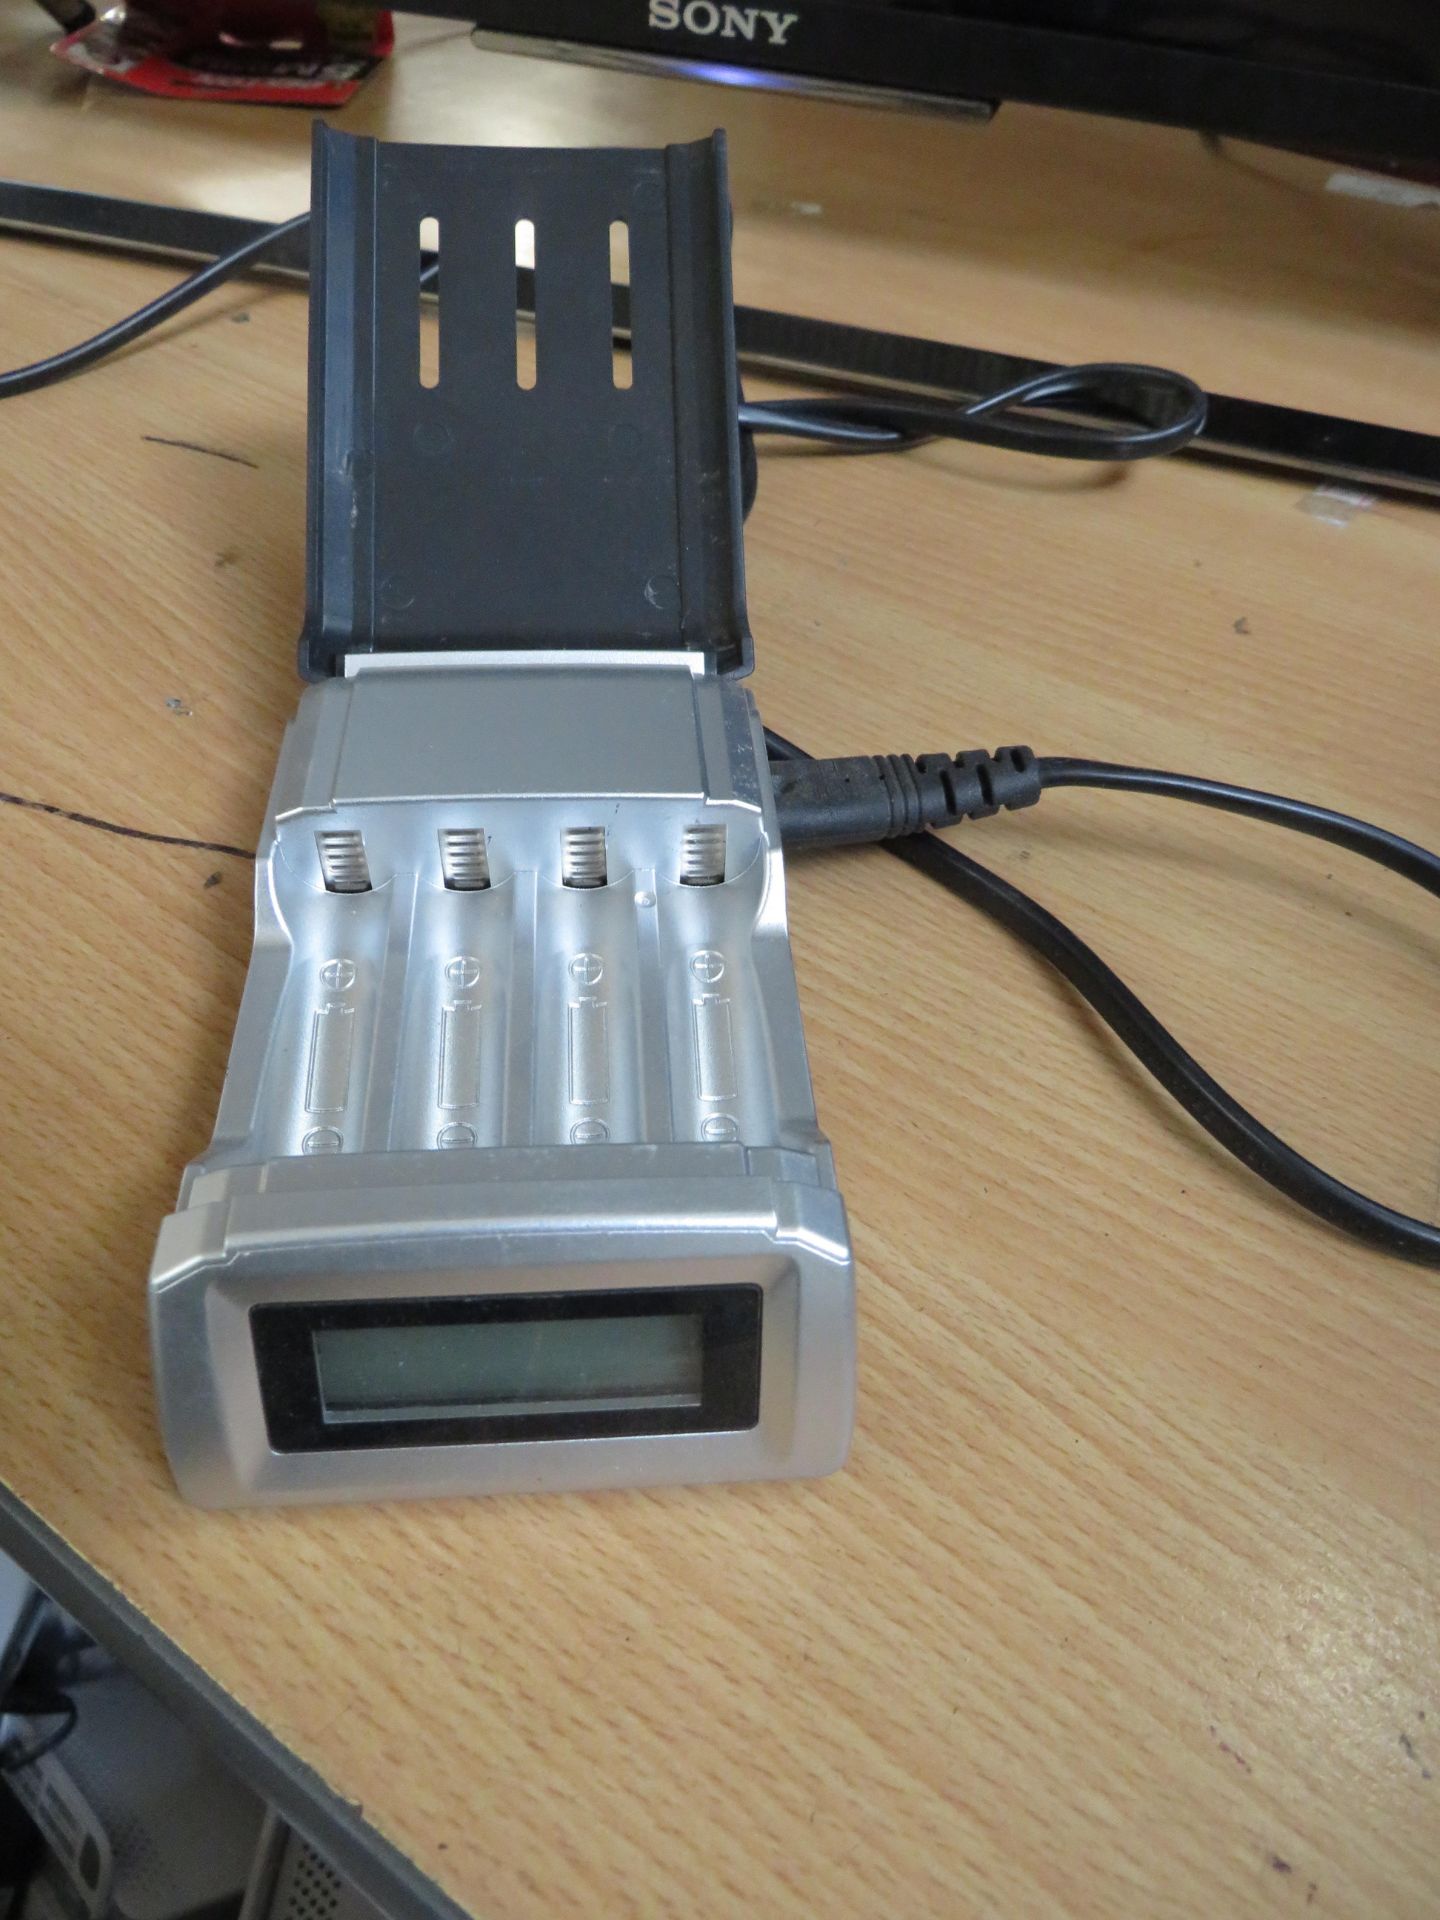 Digital Battery charger for both AAA and AA batteries the ideal Xmas money saver